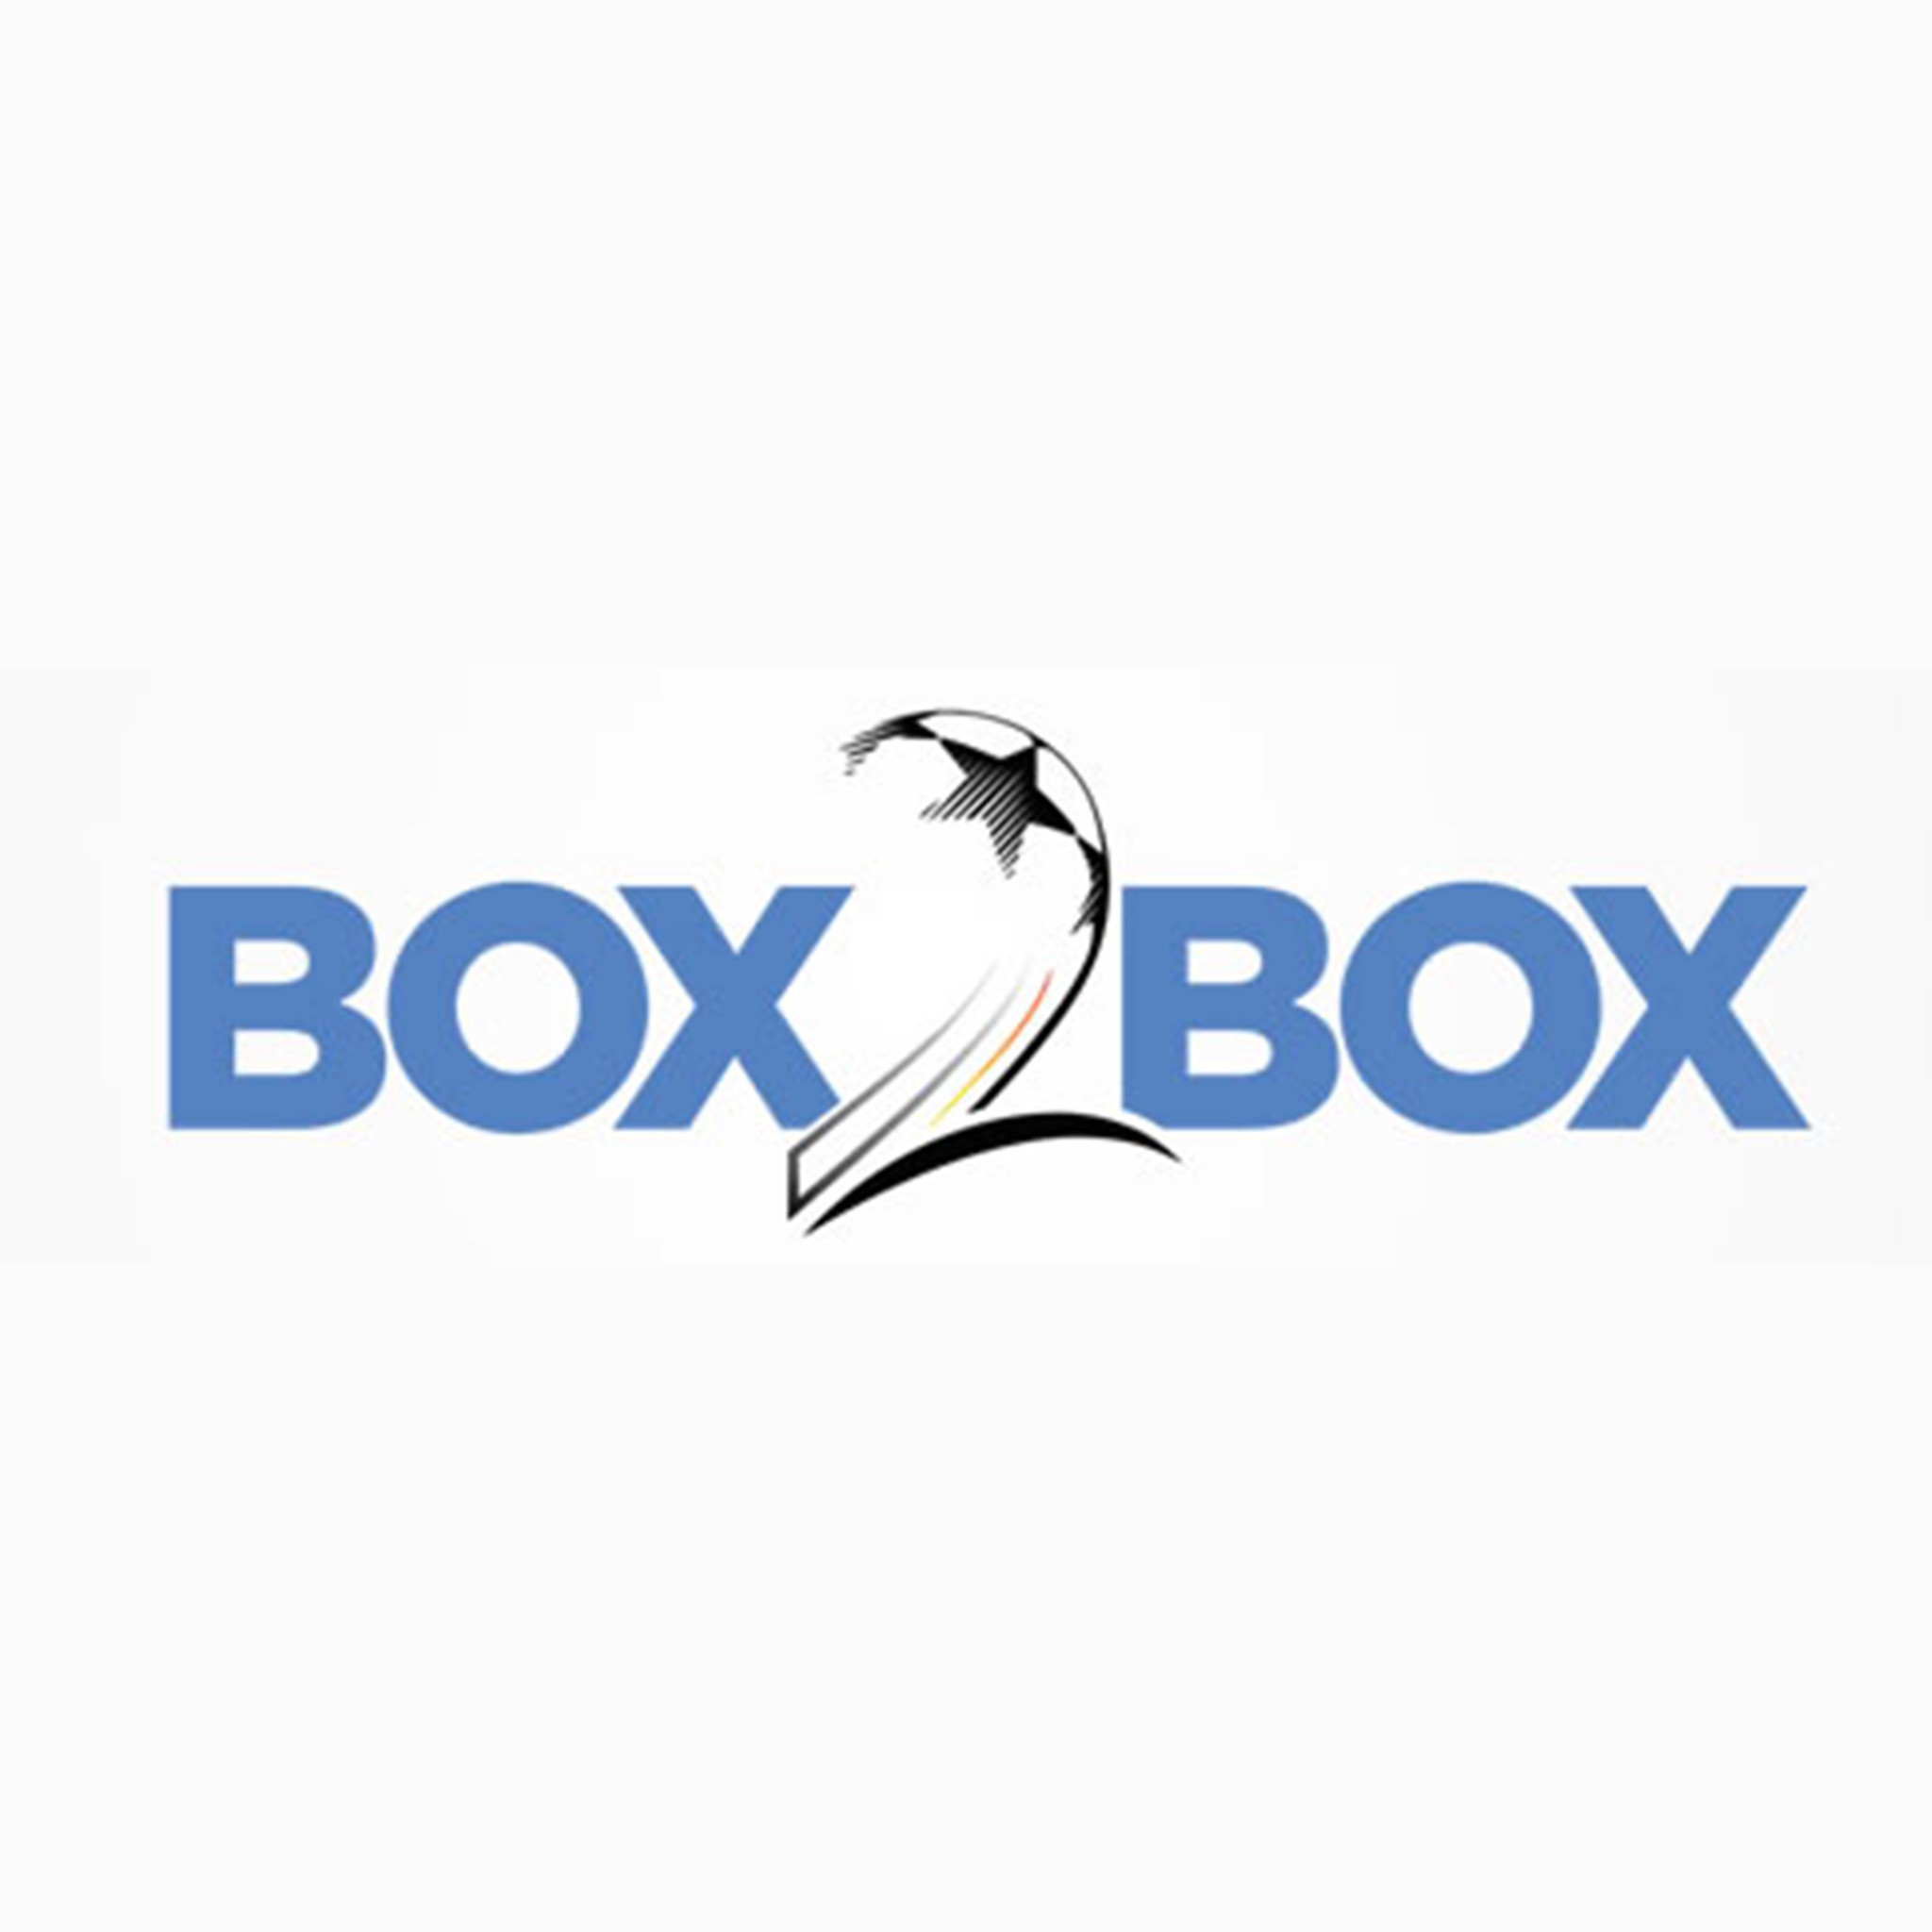 Box2Box - Tom Smithies looks at the Socceroos World Cup journey, Martin Tyler opines on the Three Lions ahead of the Euro's